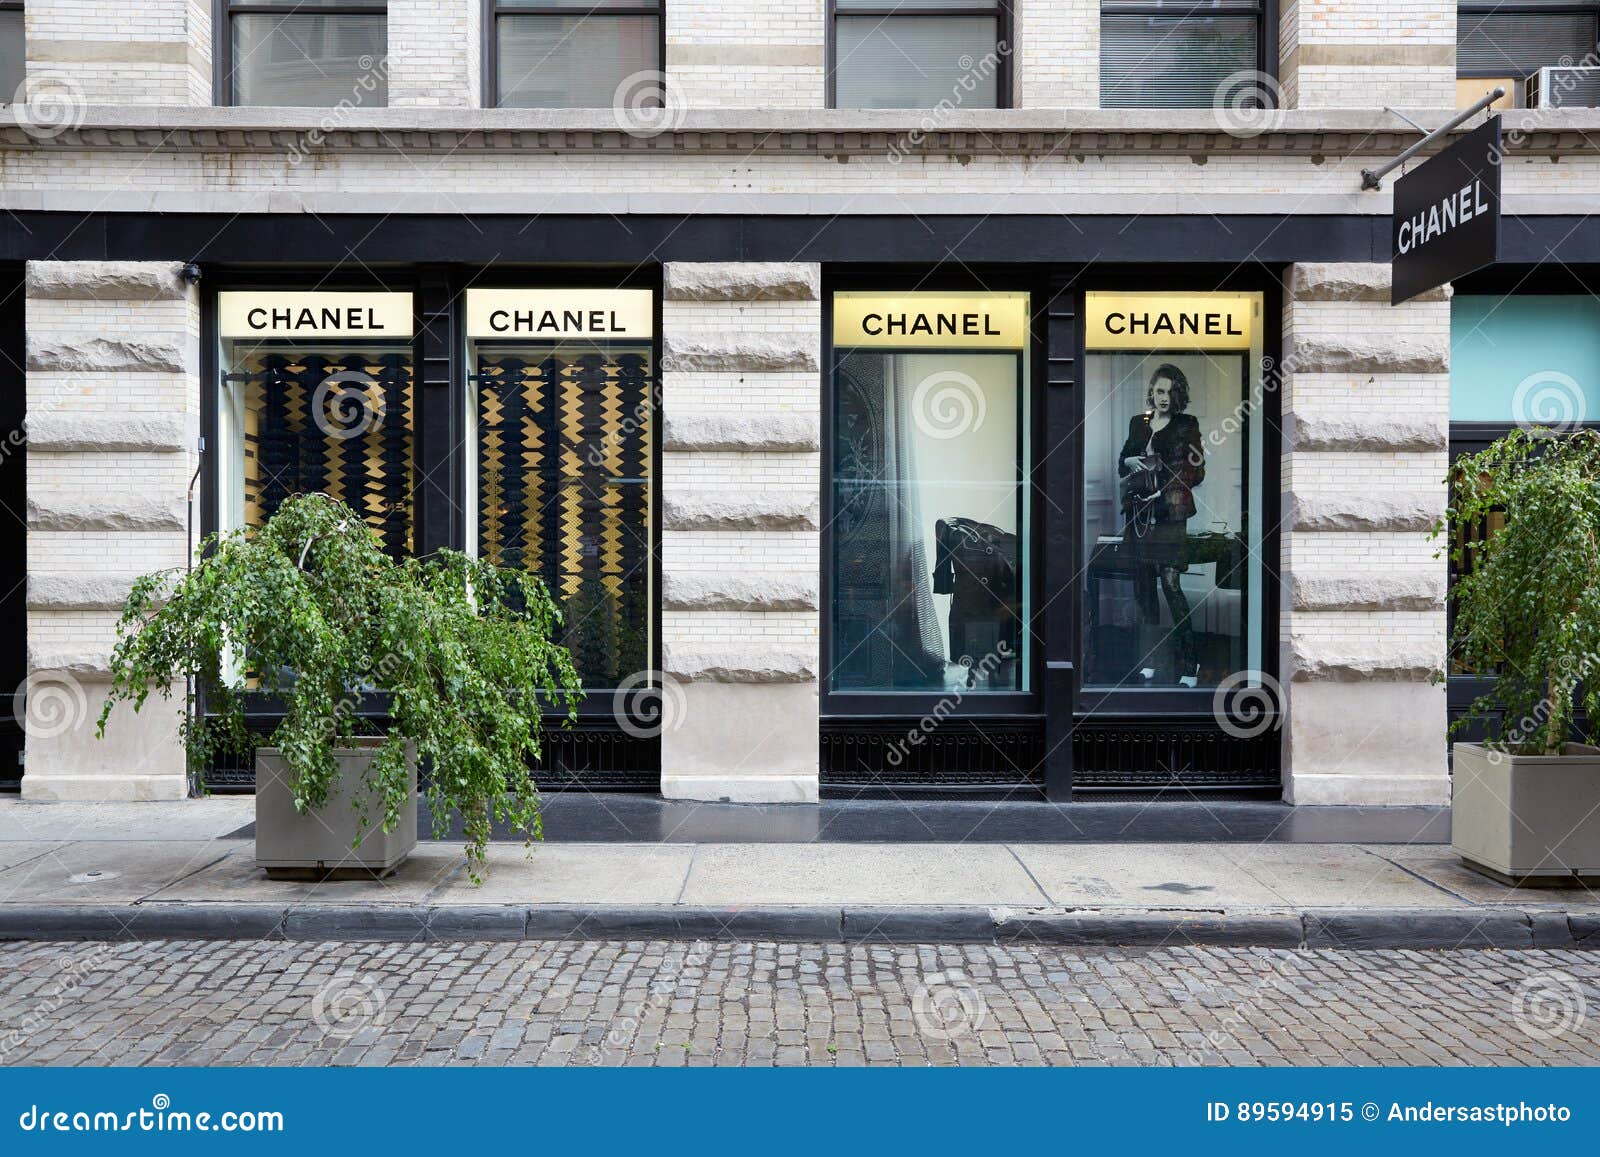 Chanel Shop Exterior View in 139 Spring St, New York Editorial Image - Image  of shop, sidewalk: 89594915